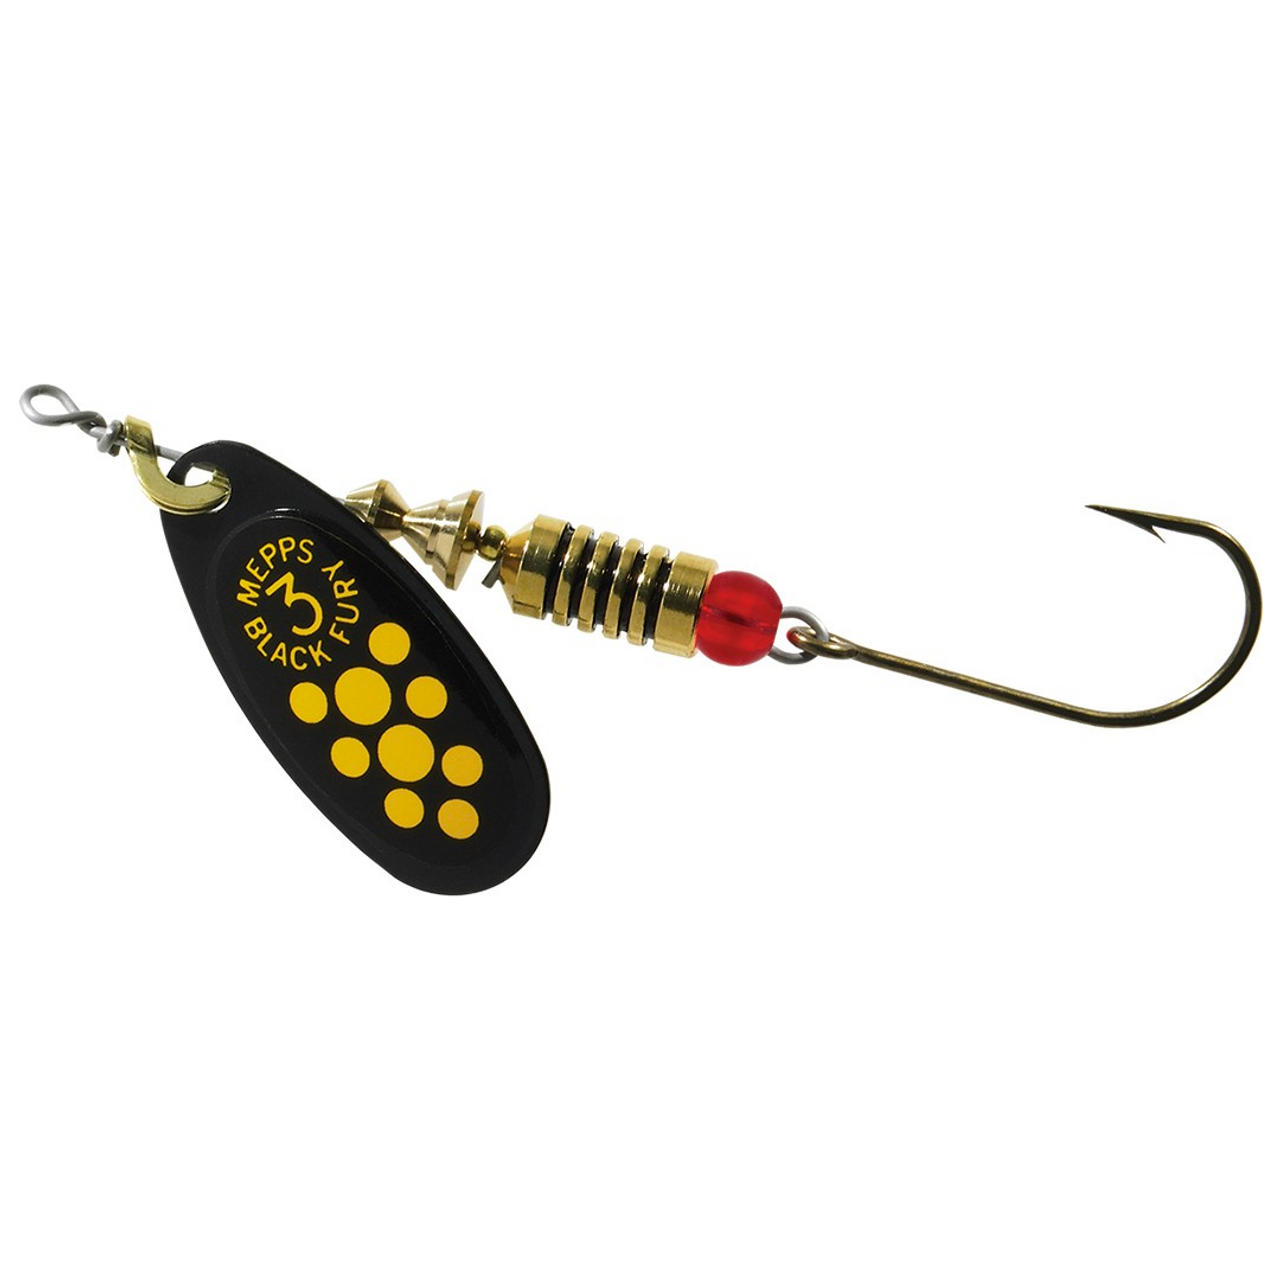 Premium Feathered Treble Hook Effective Fishing Lures Tackle